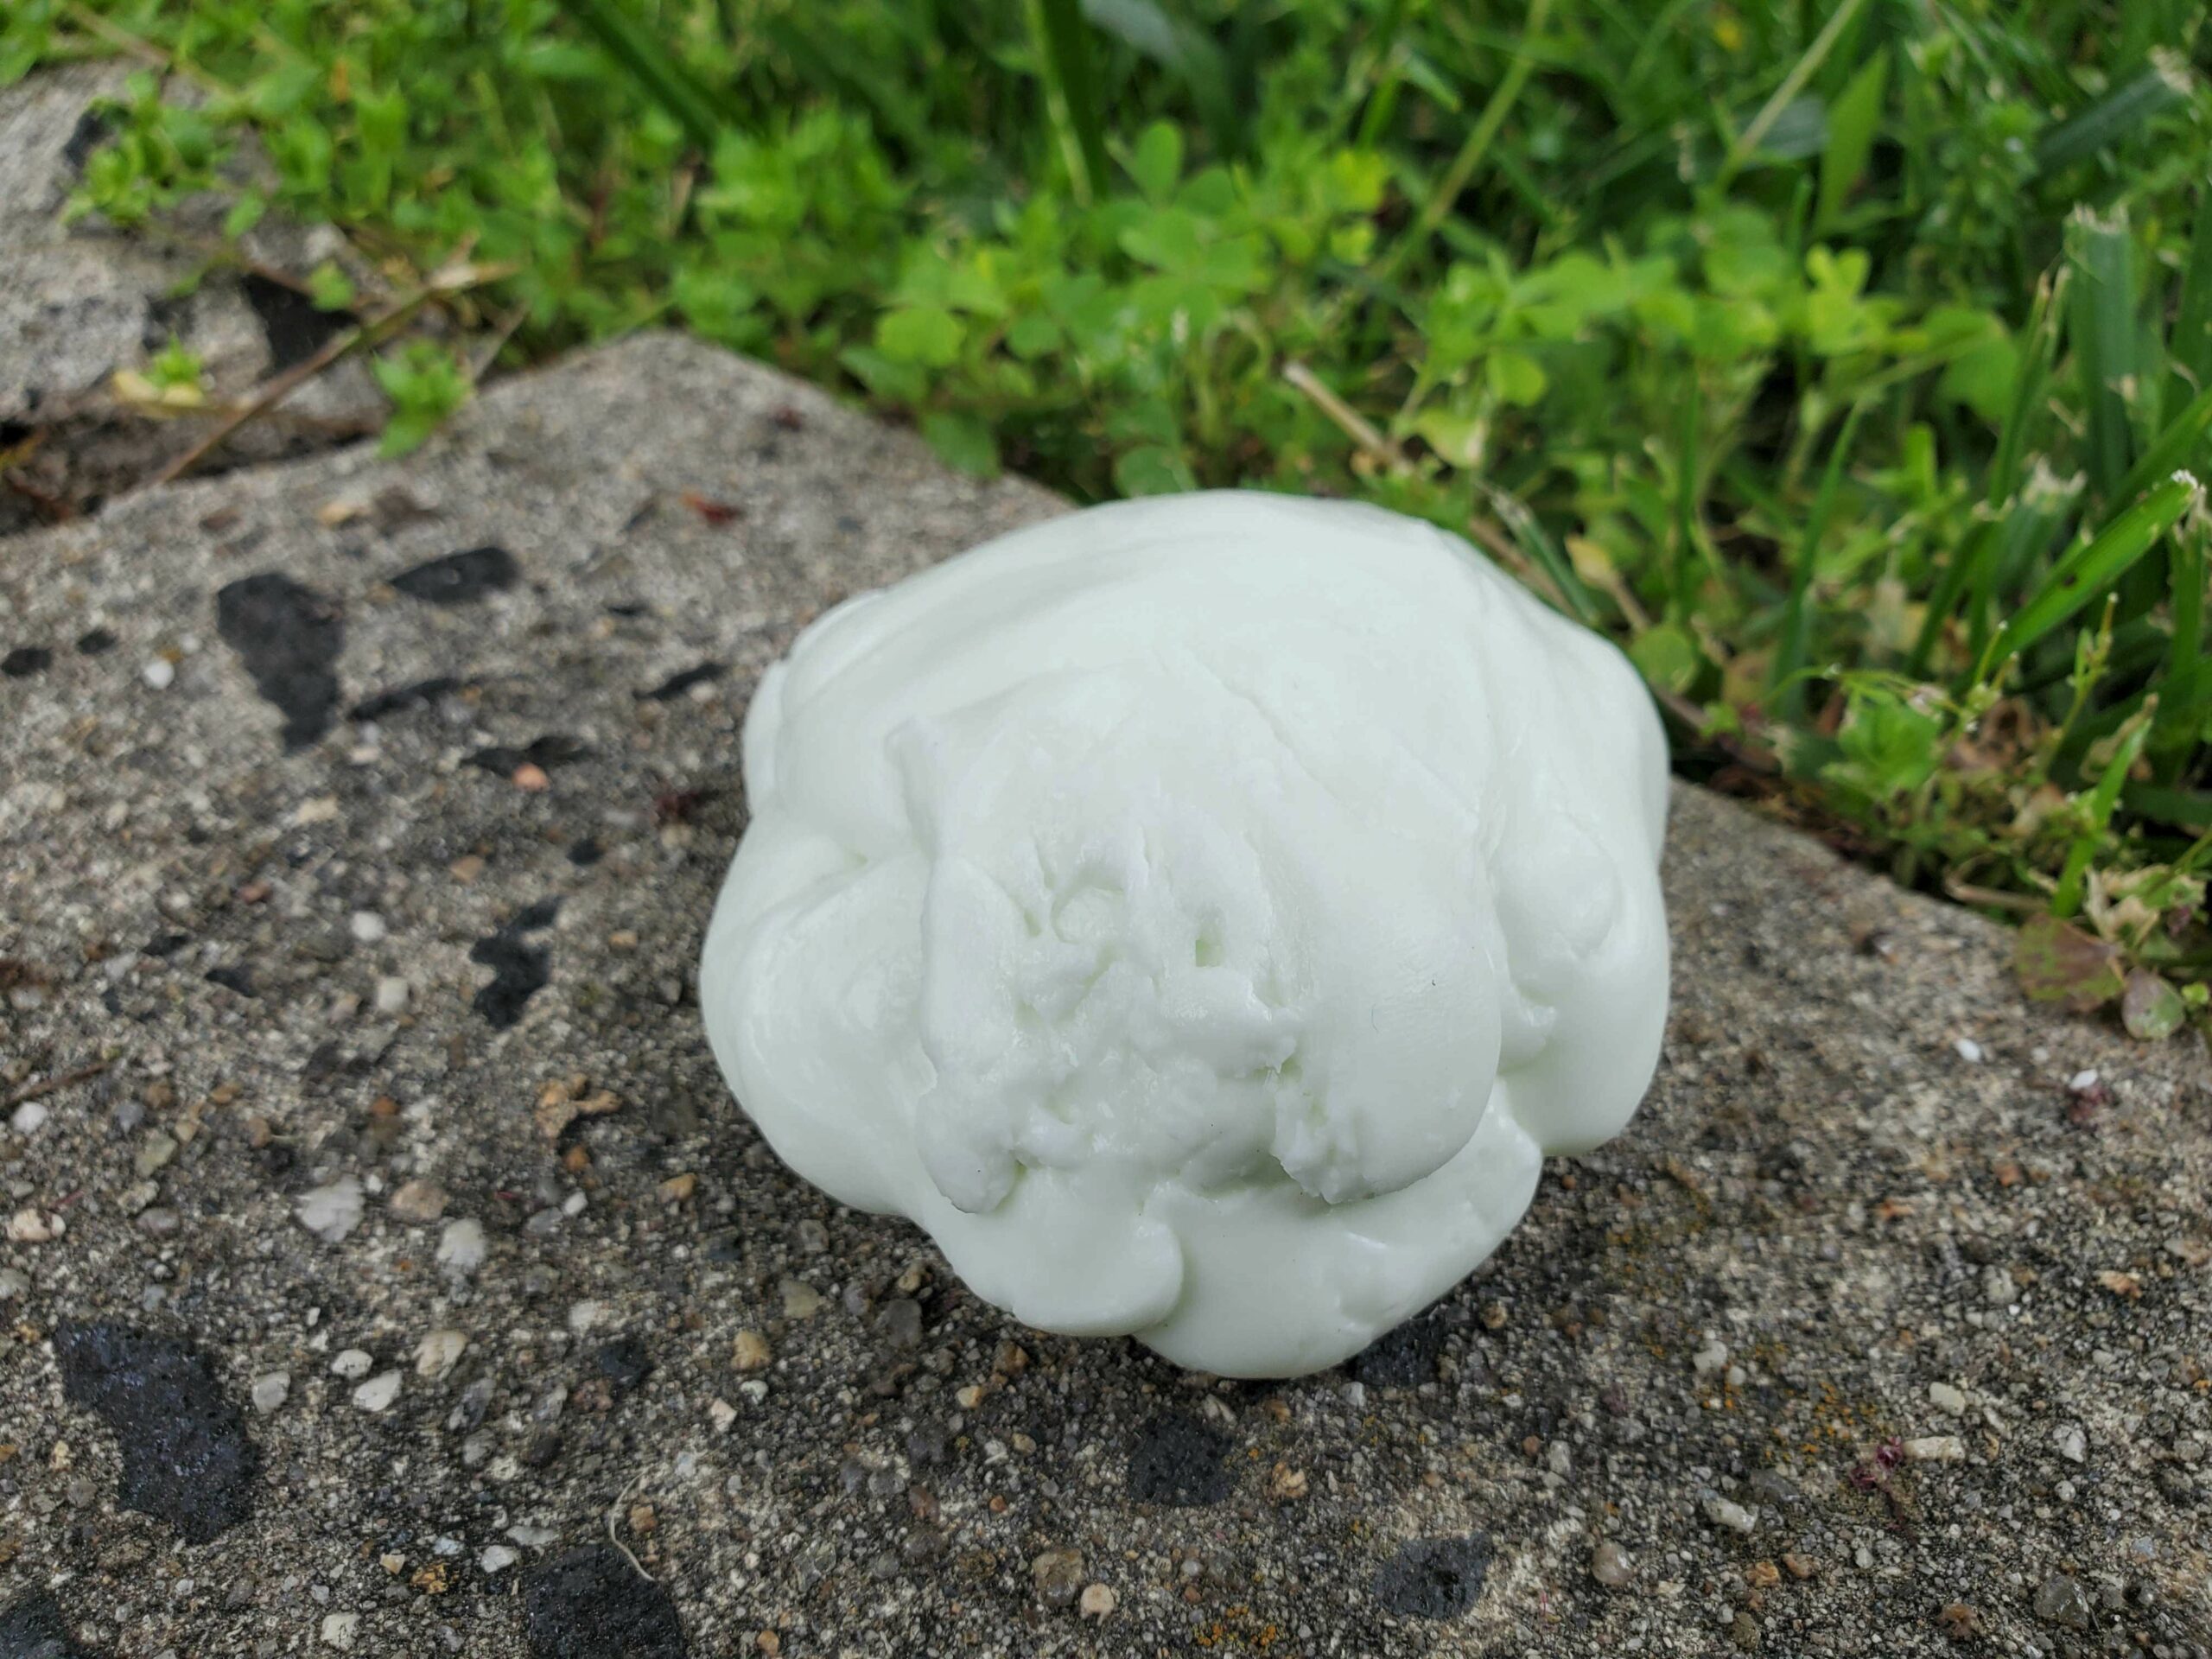 Stay-at-home science project: Two-ingredient Silly Putty